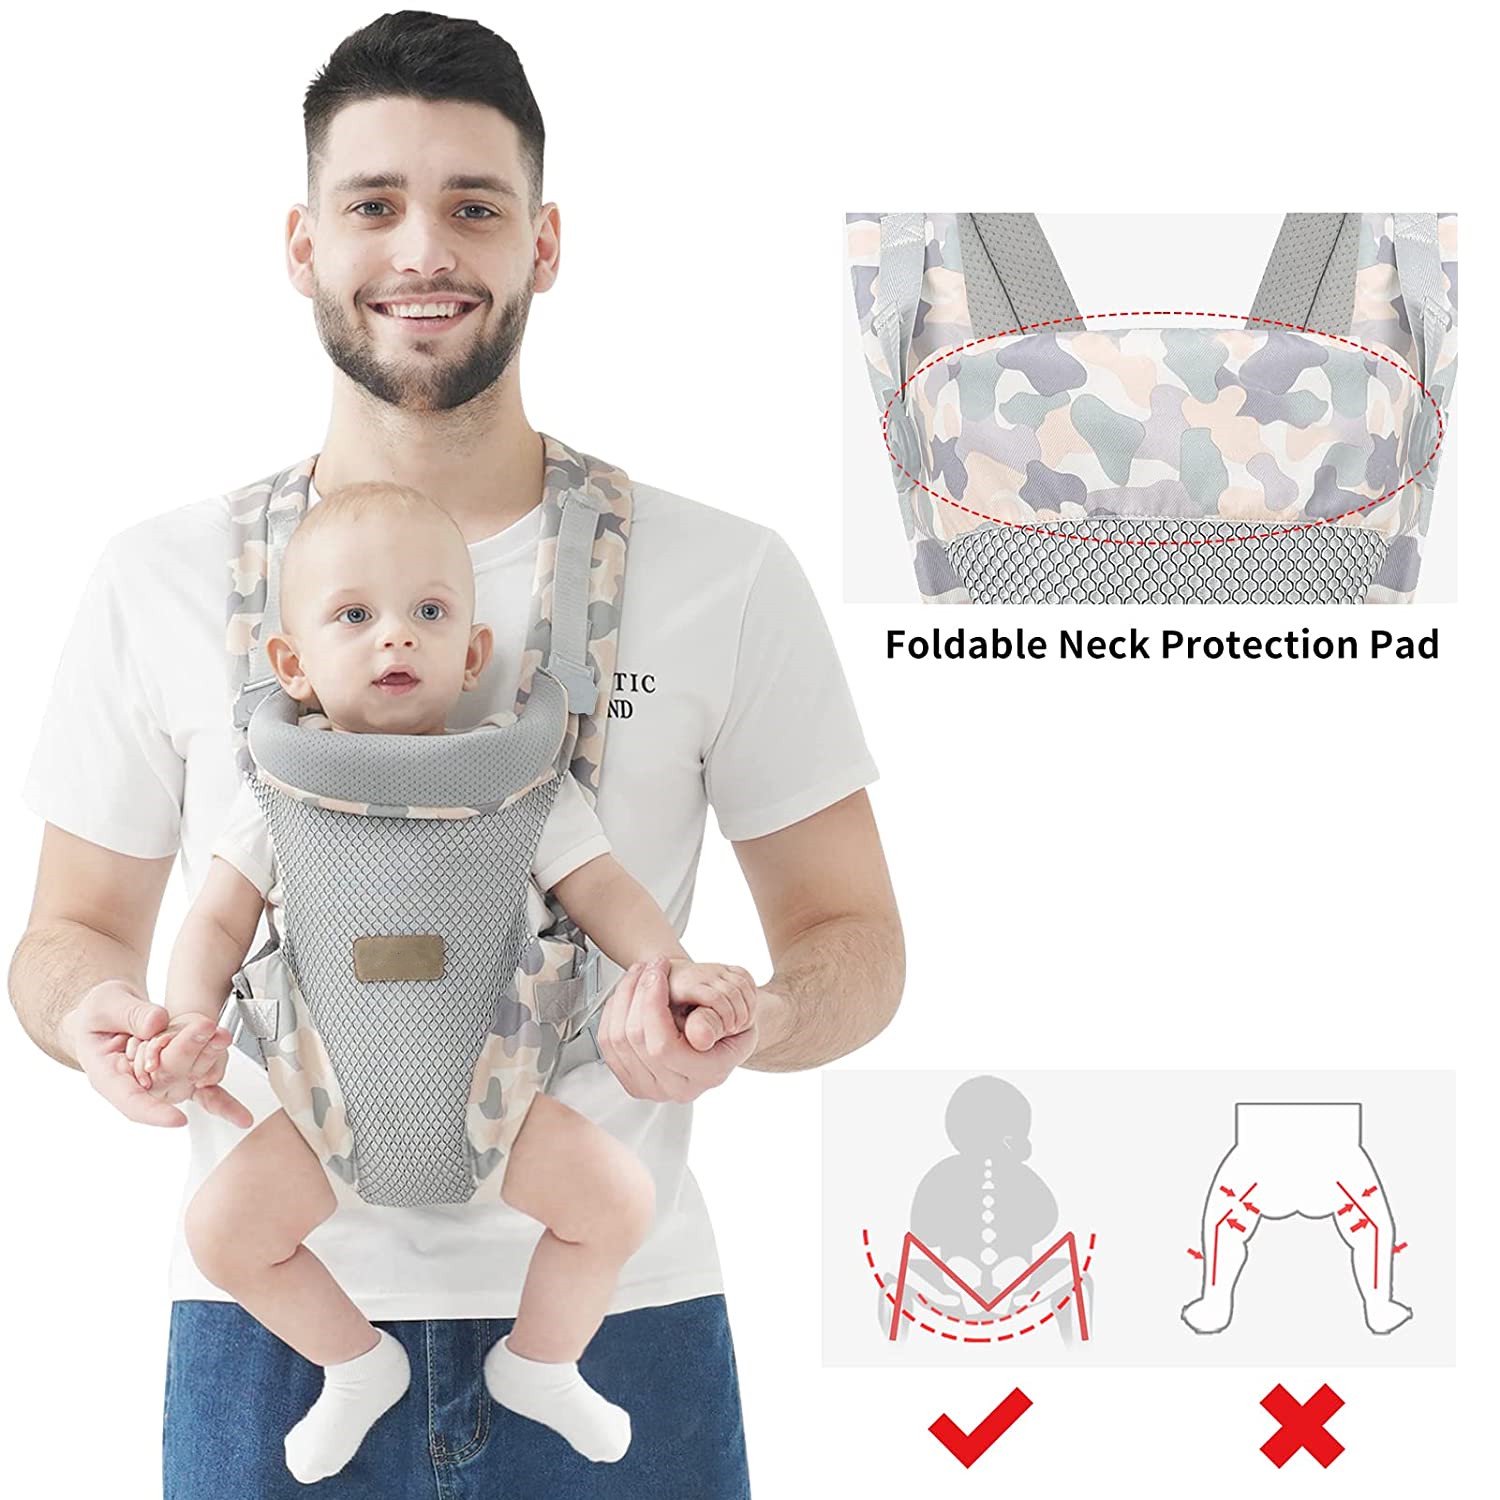 Yadala Baby Carrier, 4-in-1 Camouflage Baby Carrier, Front and Back Baby Sling with Adjustable Holder - image 4 of 8